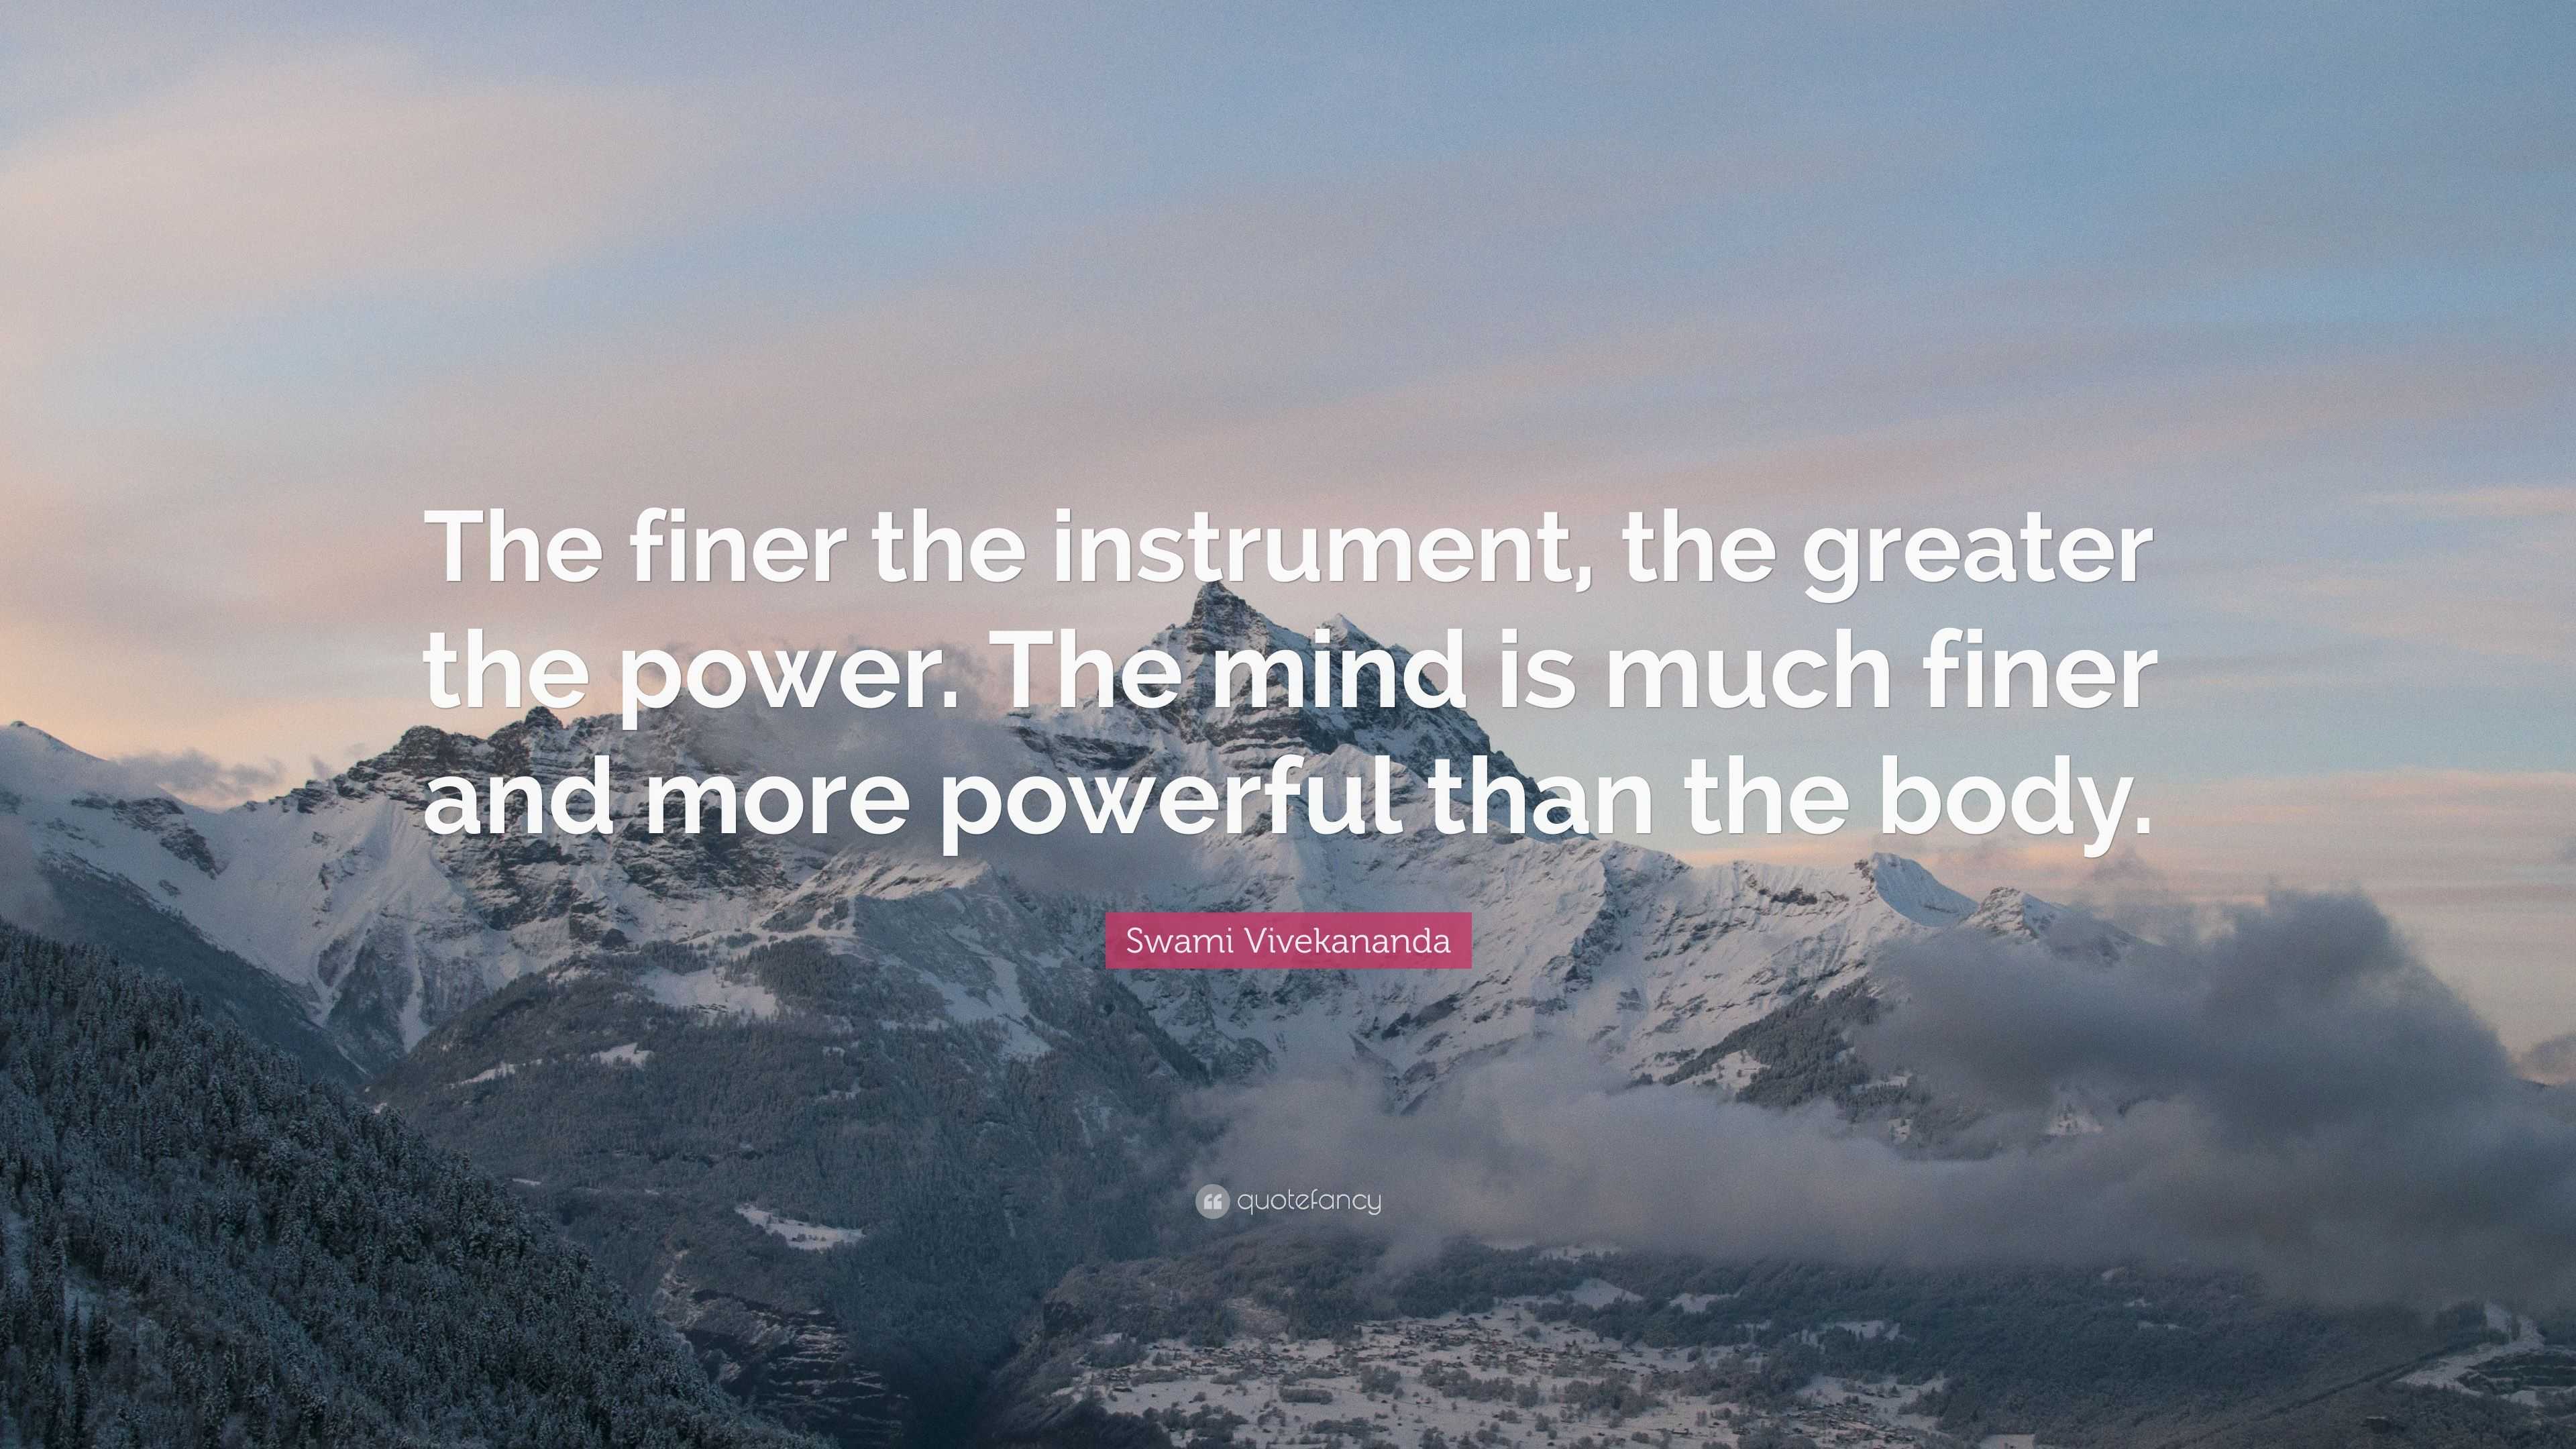 Swami Vivekananda Quote: “The finer the instrument, the greater the ...